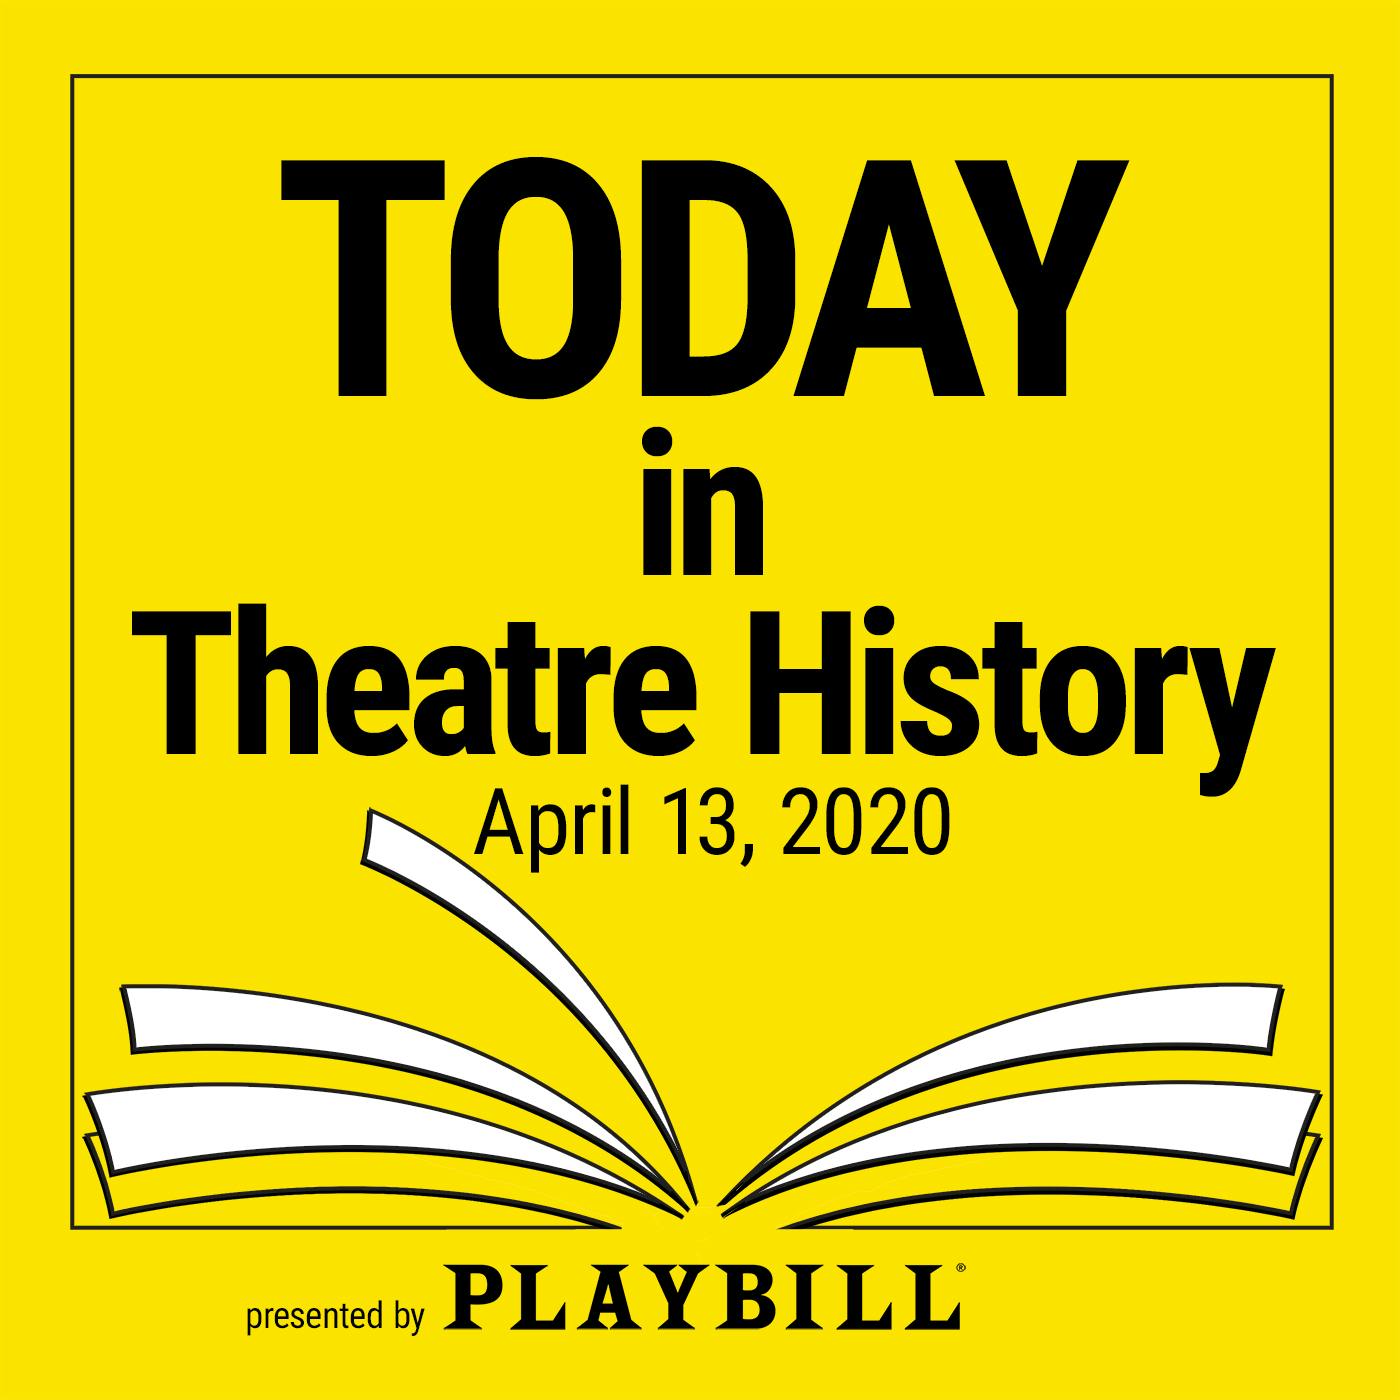 April 13, 2020: Toni Collette got Wild, and Broadway got a cockroach, an alley cat, a frog and a toad today in history.